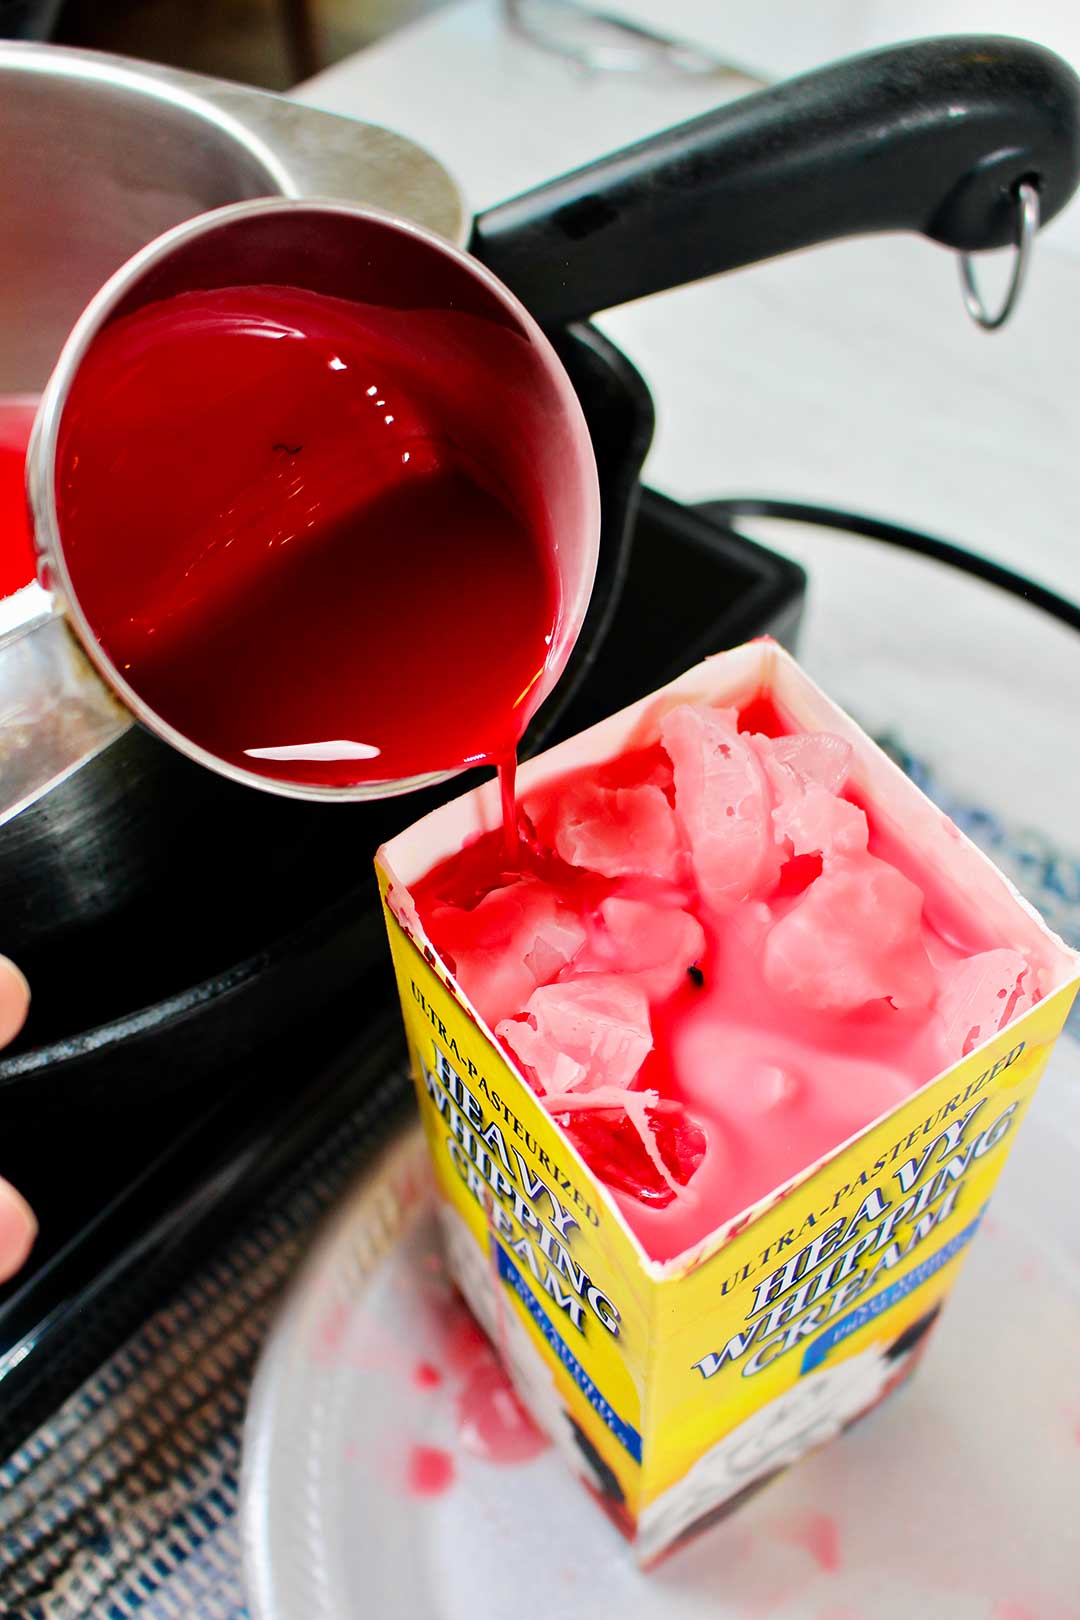 Melted red wax being poured into carton with ice cubes and wick.